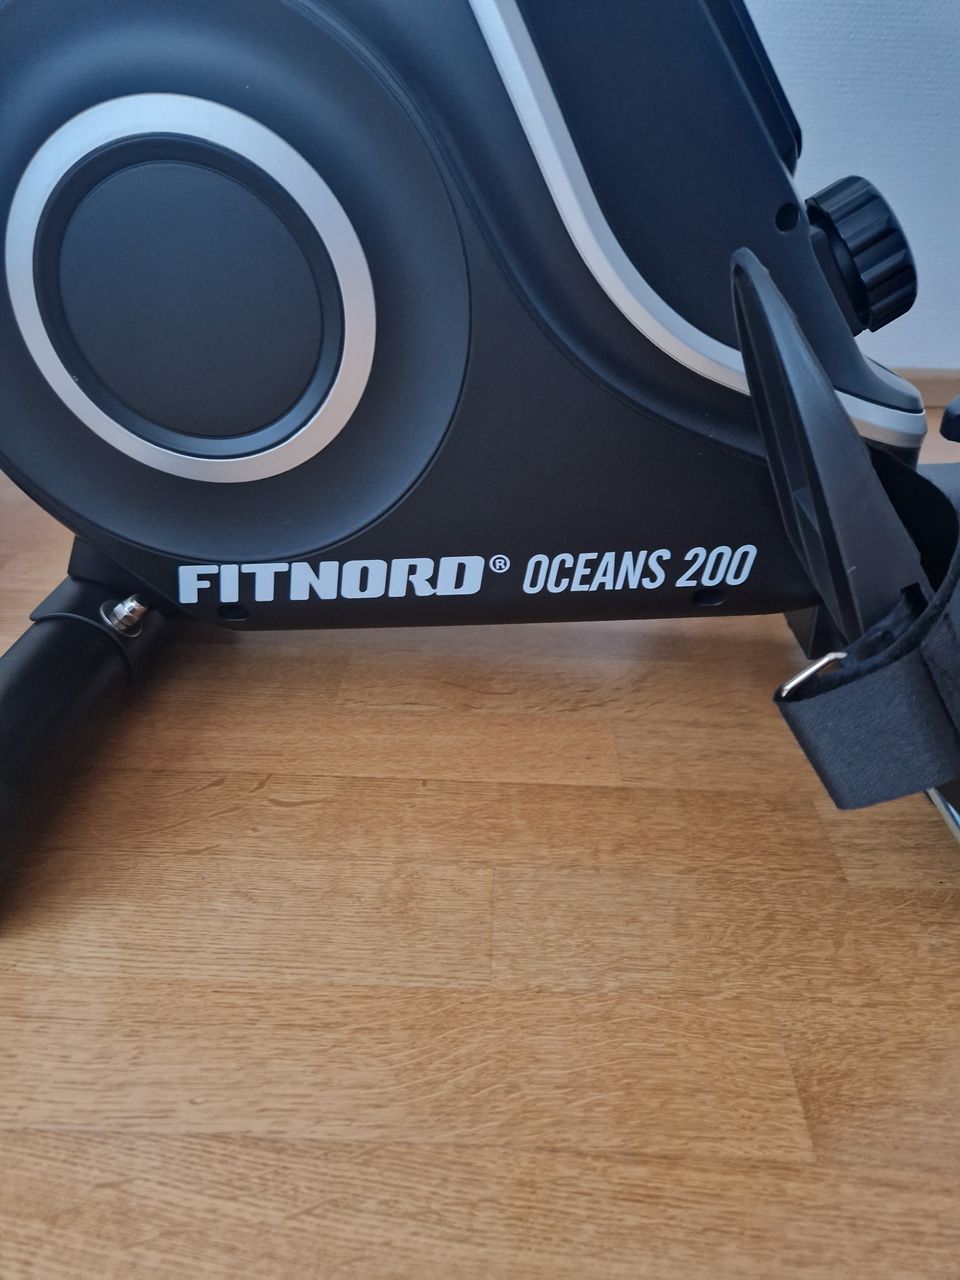 Fitnord Oceans 200 Soutulaite